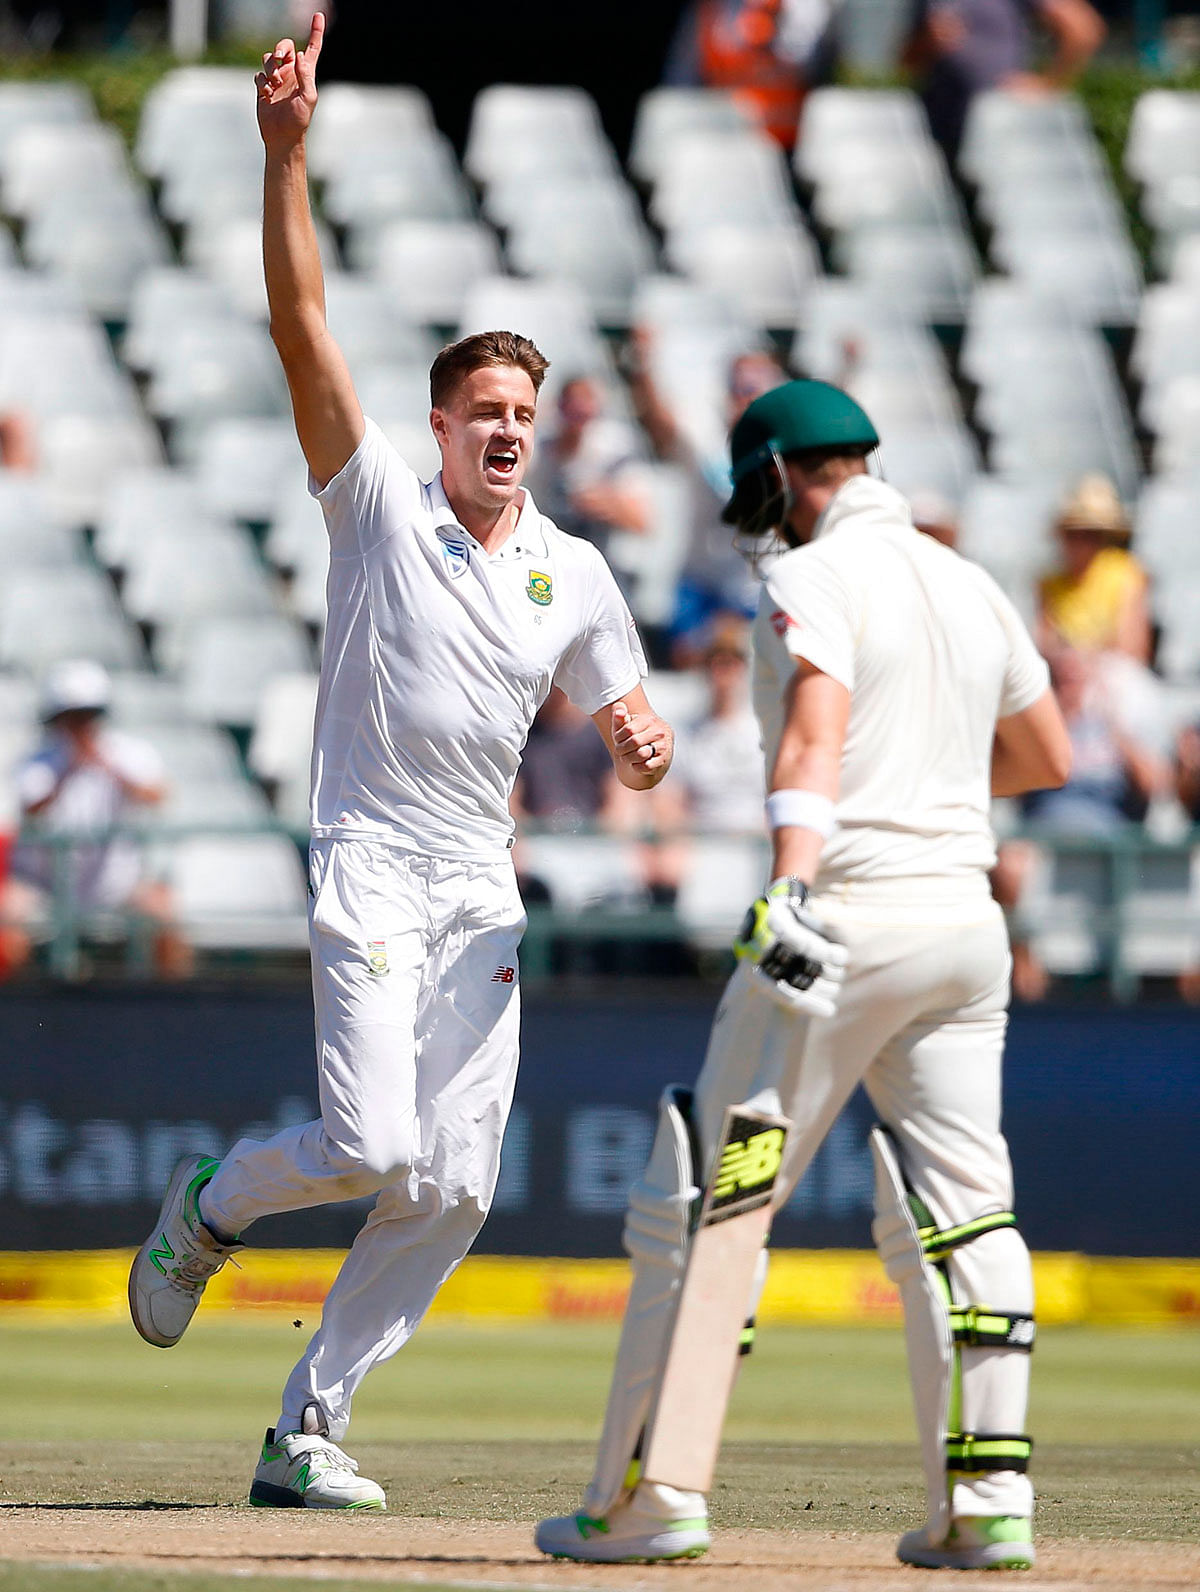 South African bowler Morne Morkel (L) celebrates the dismissal of Australian batsman Steven Smith (R) during the second day of the third Test cricket match between South Africa and Australia at Newlands cricket ground on 23 March, 2018 in Cape Town, South Africa. Photo: AFP